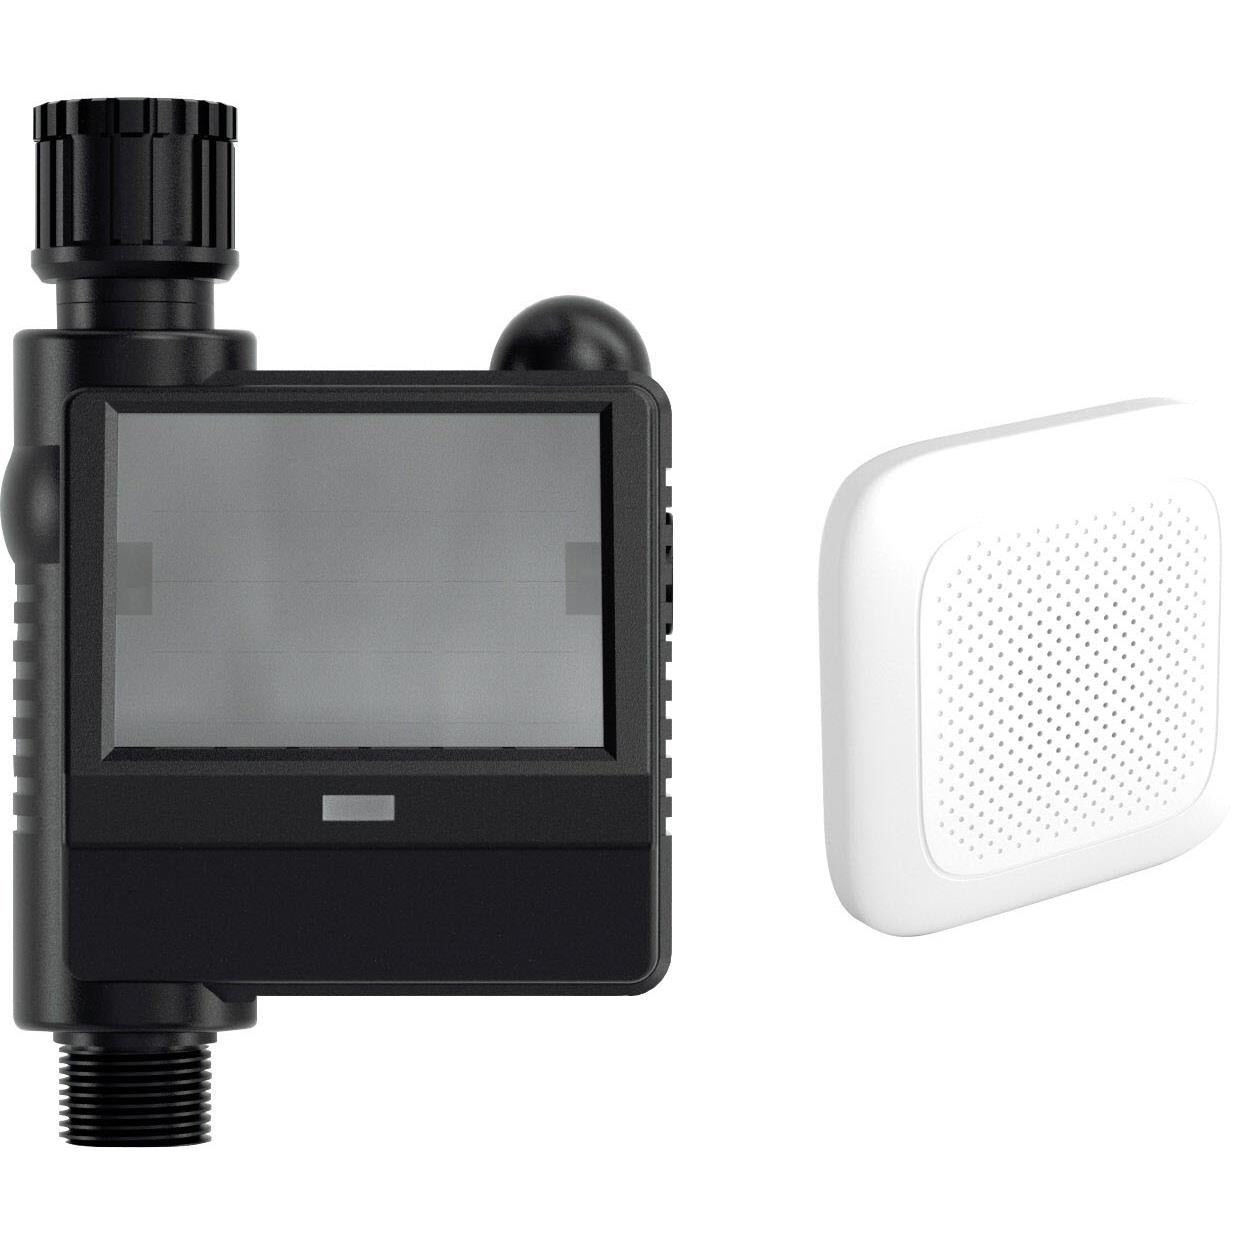 connect smart water controller